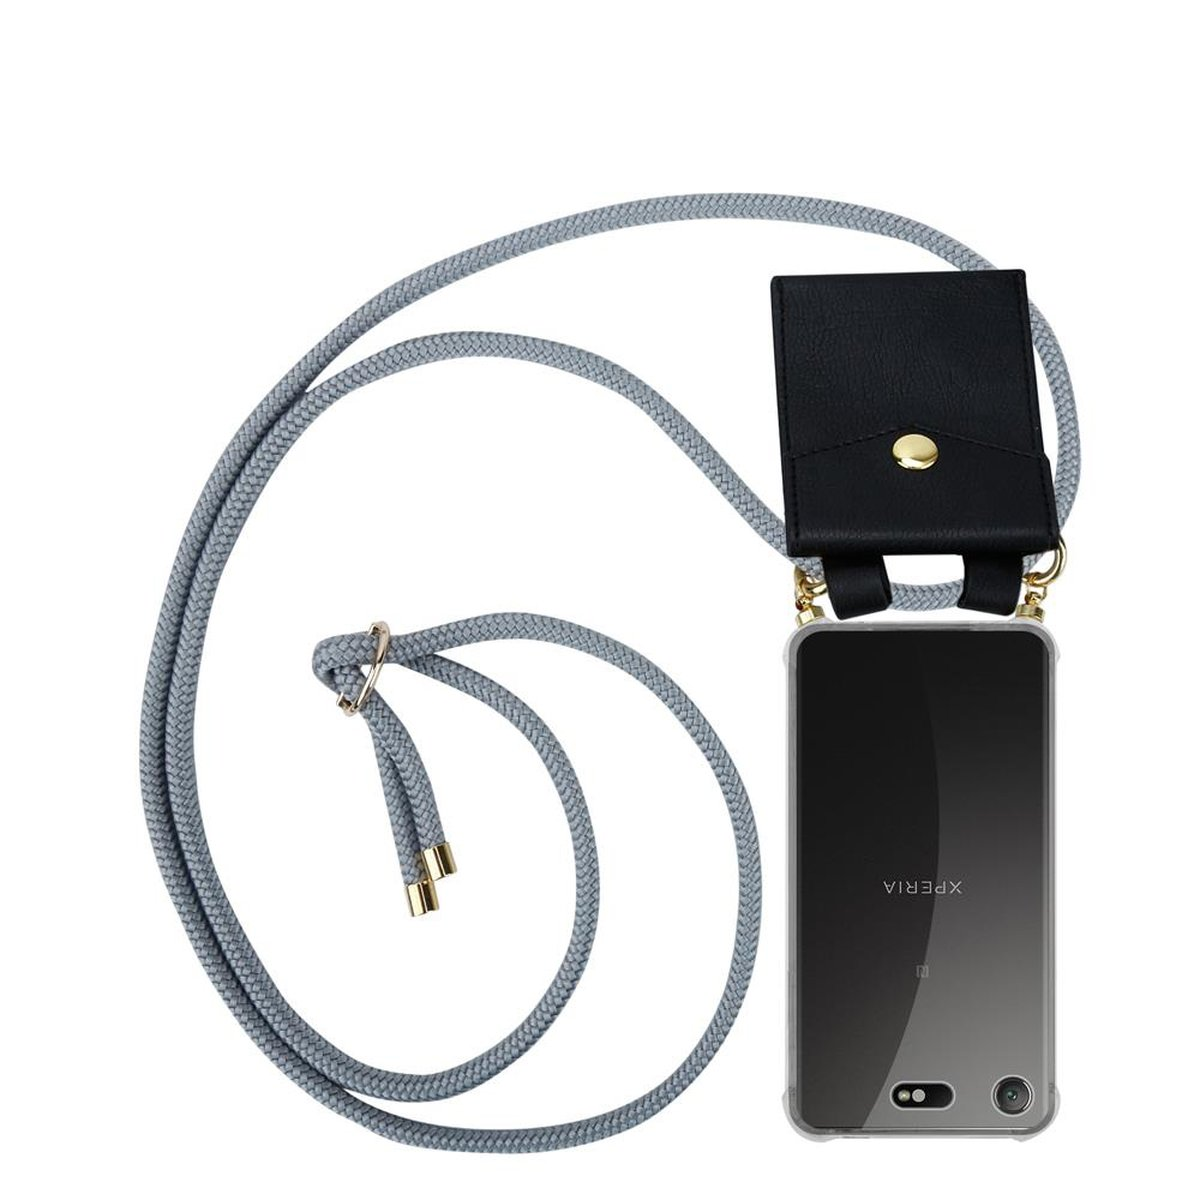 Ringen, und Band Sony, Kordel Kette abnehmbarer GRAU mit Xperia Gold Handy Hülle, XZ1 Backcover, SILBER COMPACT, CADORABO